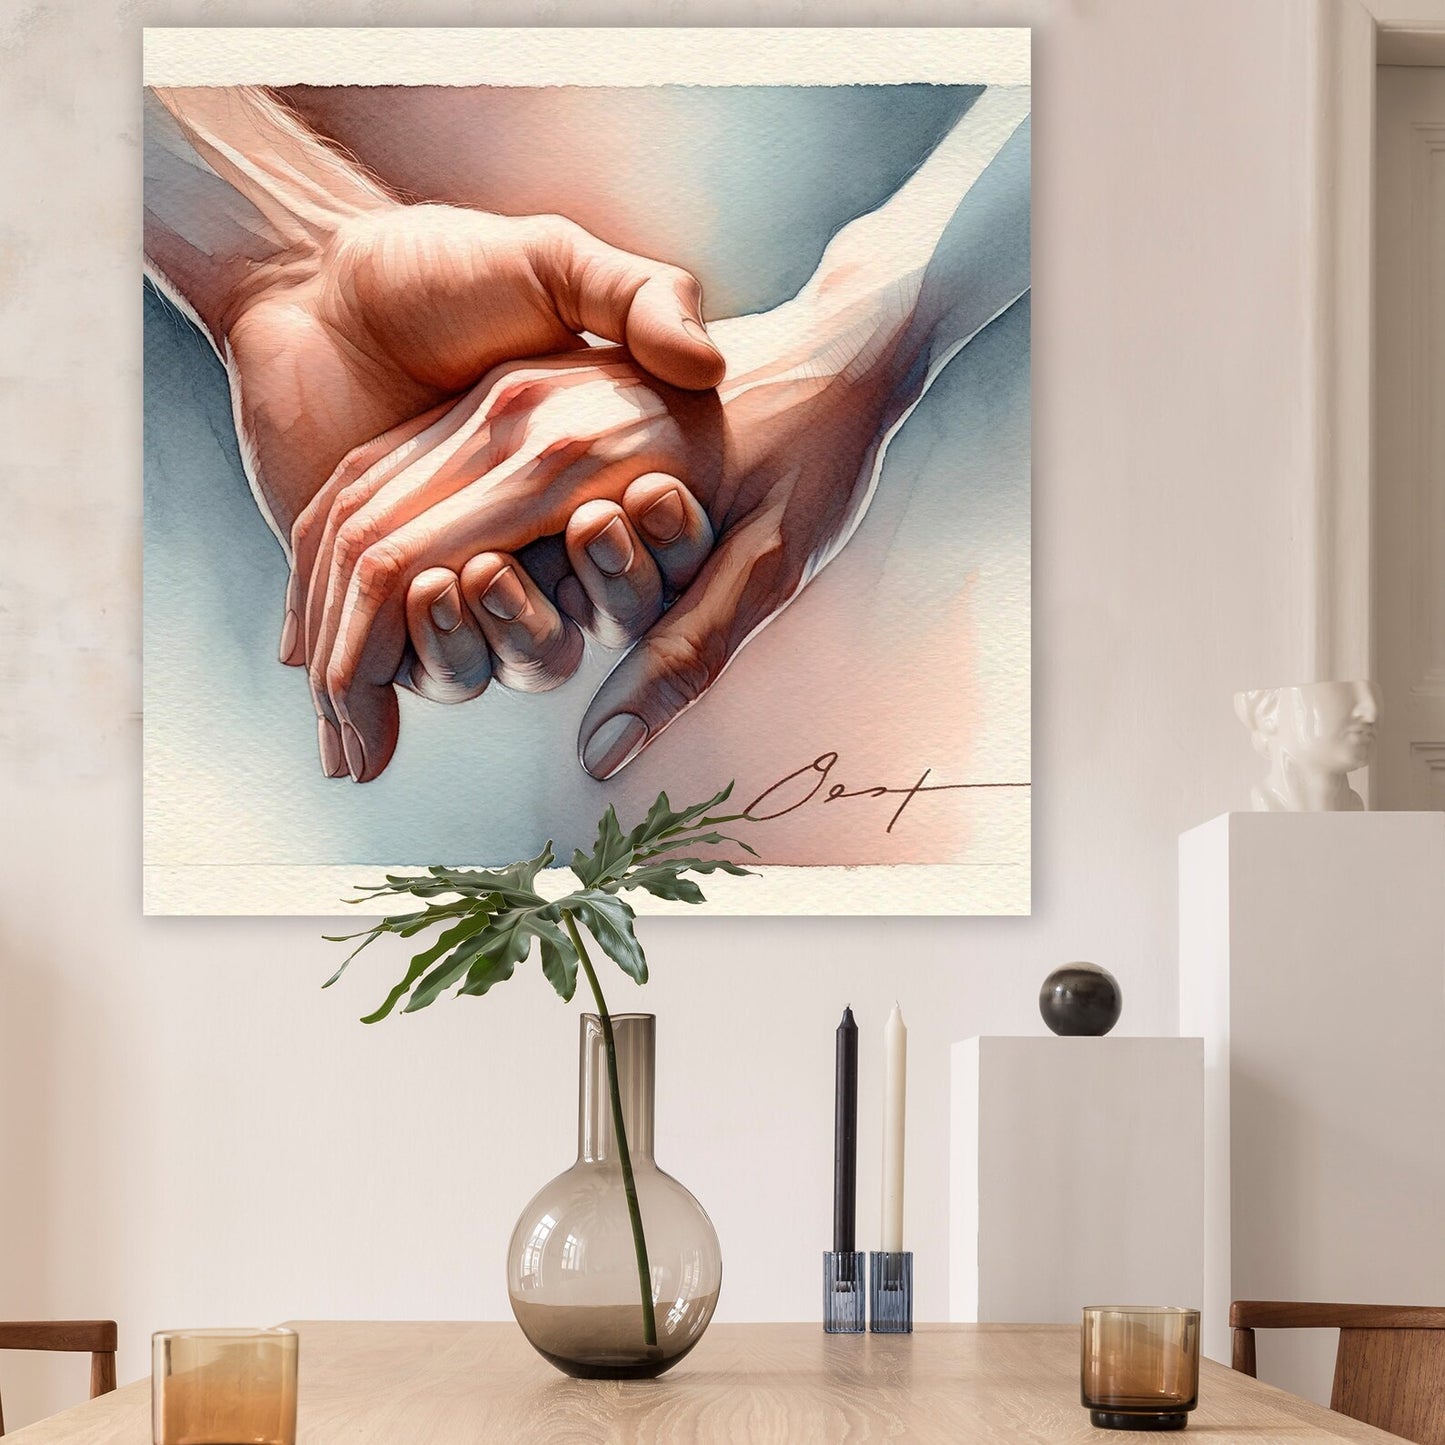 Valentine's Day present “Embrace of Souls” - Watercolor Canvas Print - Romantic Hand-Holding Art - Intimate Couple Gift